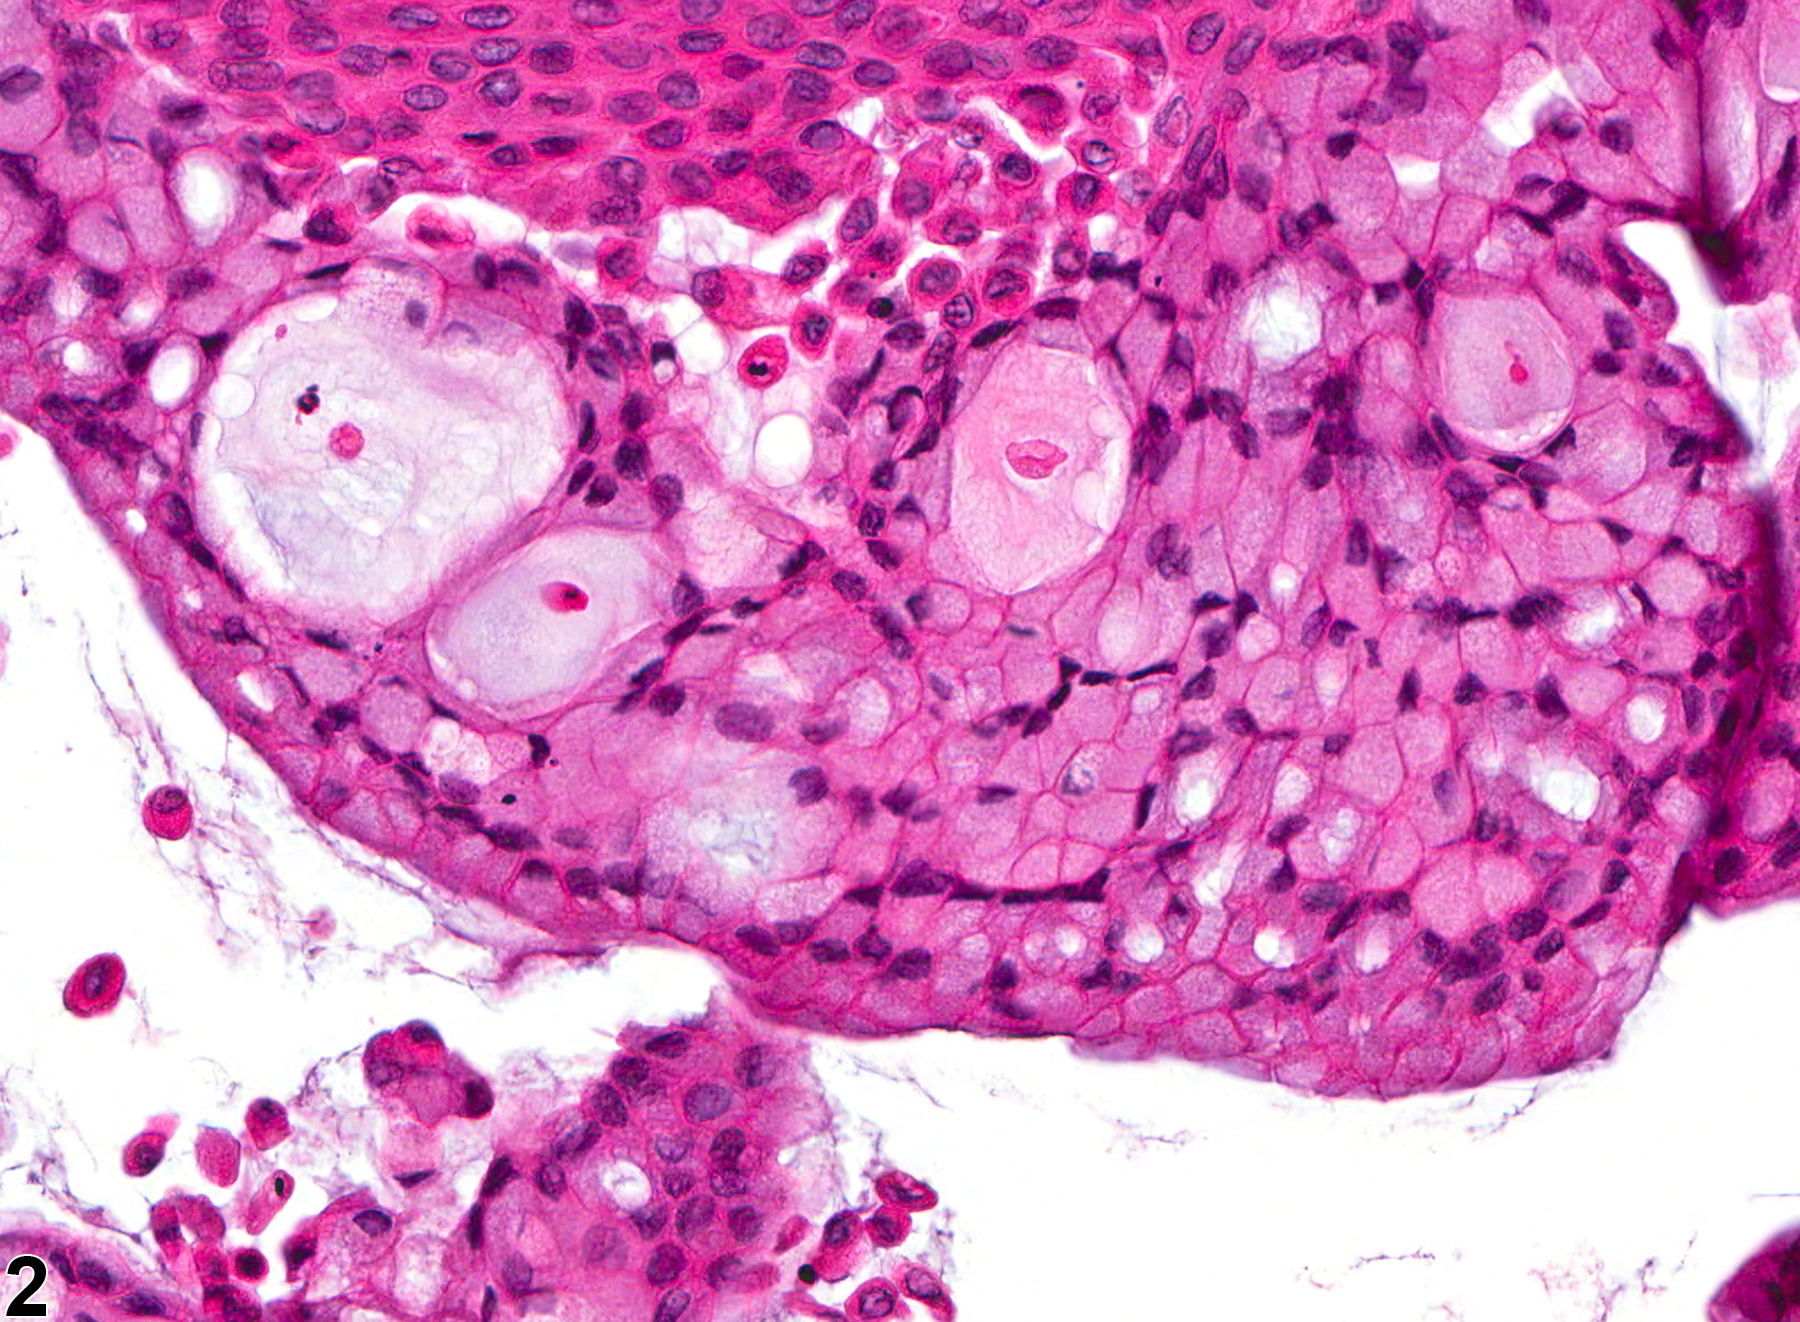 Image of mucification in the vagina from a female Harlan Sprague-Dawley rat in a chronic study